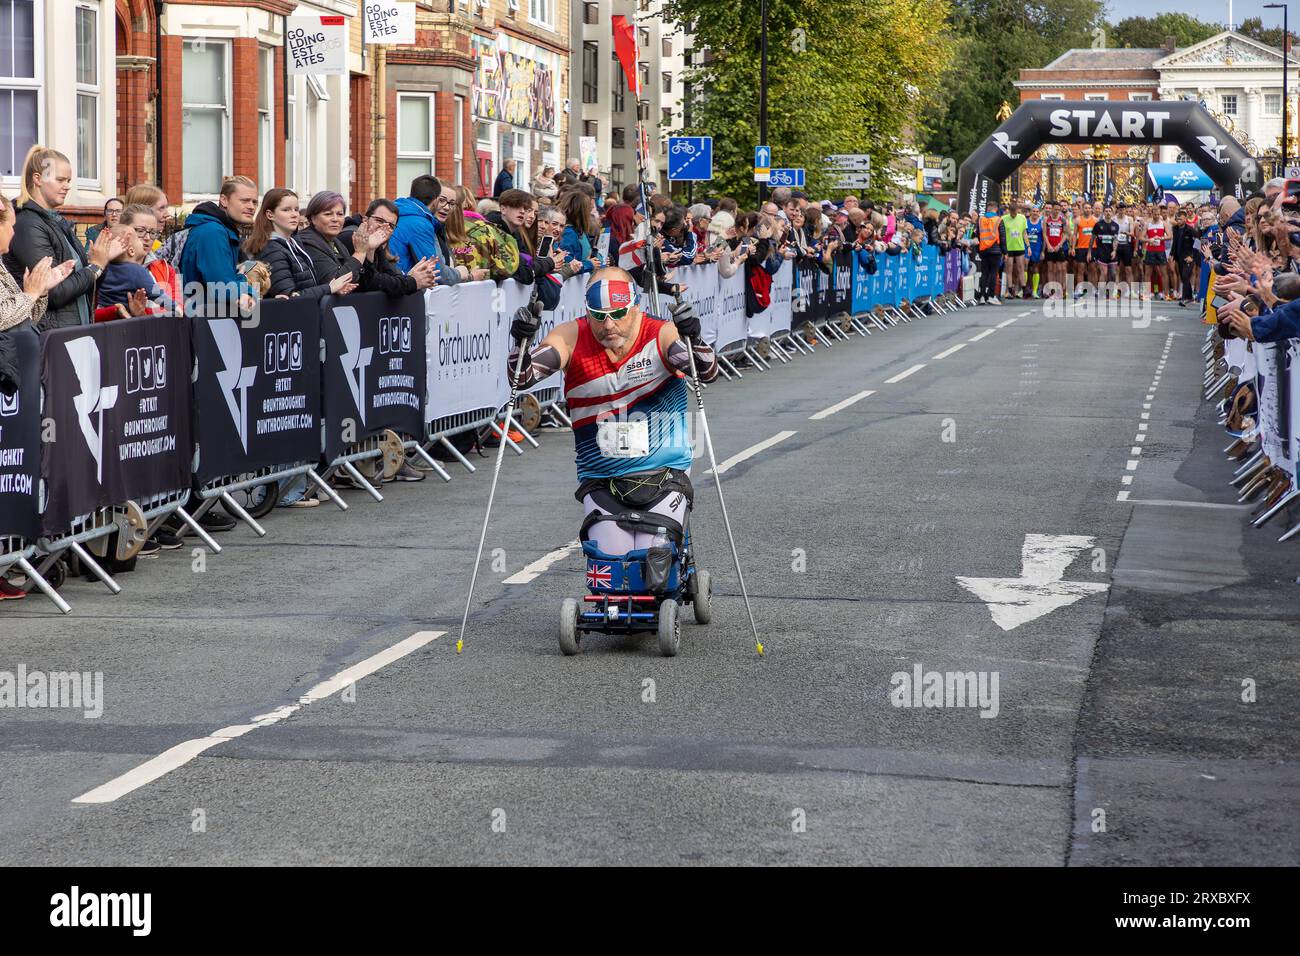 Warrington, Cheshire, UK. Sunday 24 September 2023 - Warrington, Cheshire, England, UK - The world's first free to enter, chipped and closed roads running festival took place and Injured and arthritic ex-soldier, Steven Hughes, begins alone on a para Nordic roller sitski before the runners start their race. Credit: John Hopkins/Alamy Live News Stock Photo